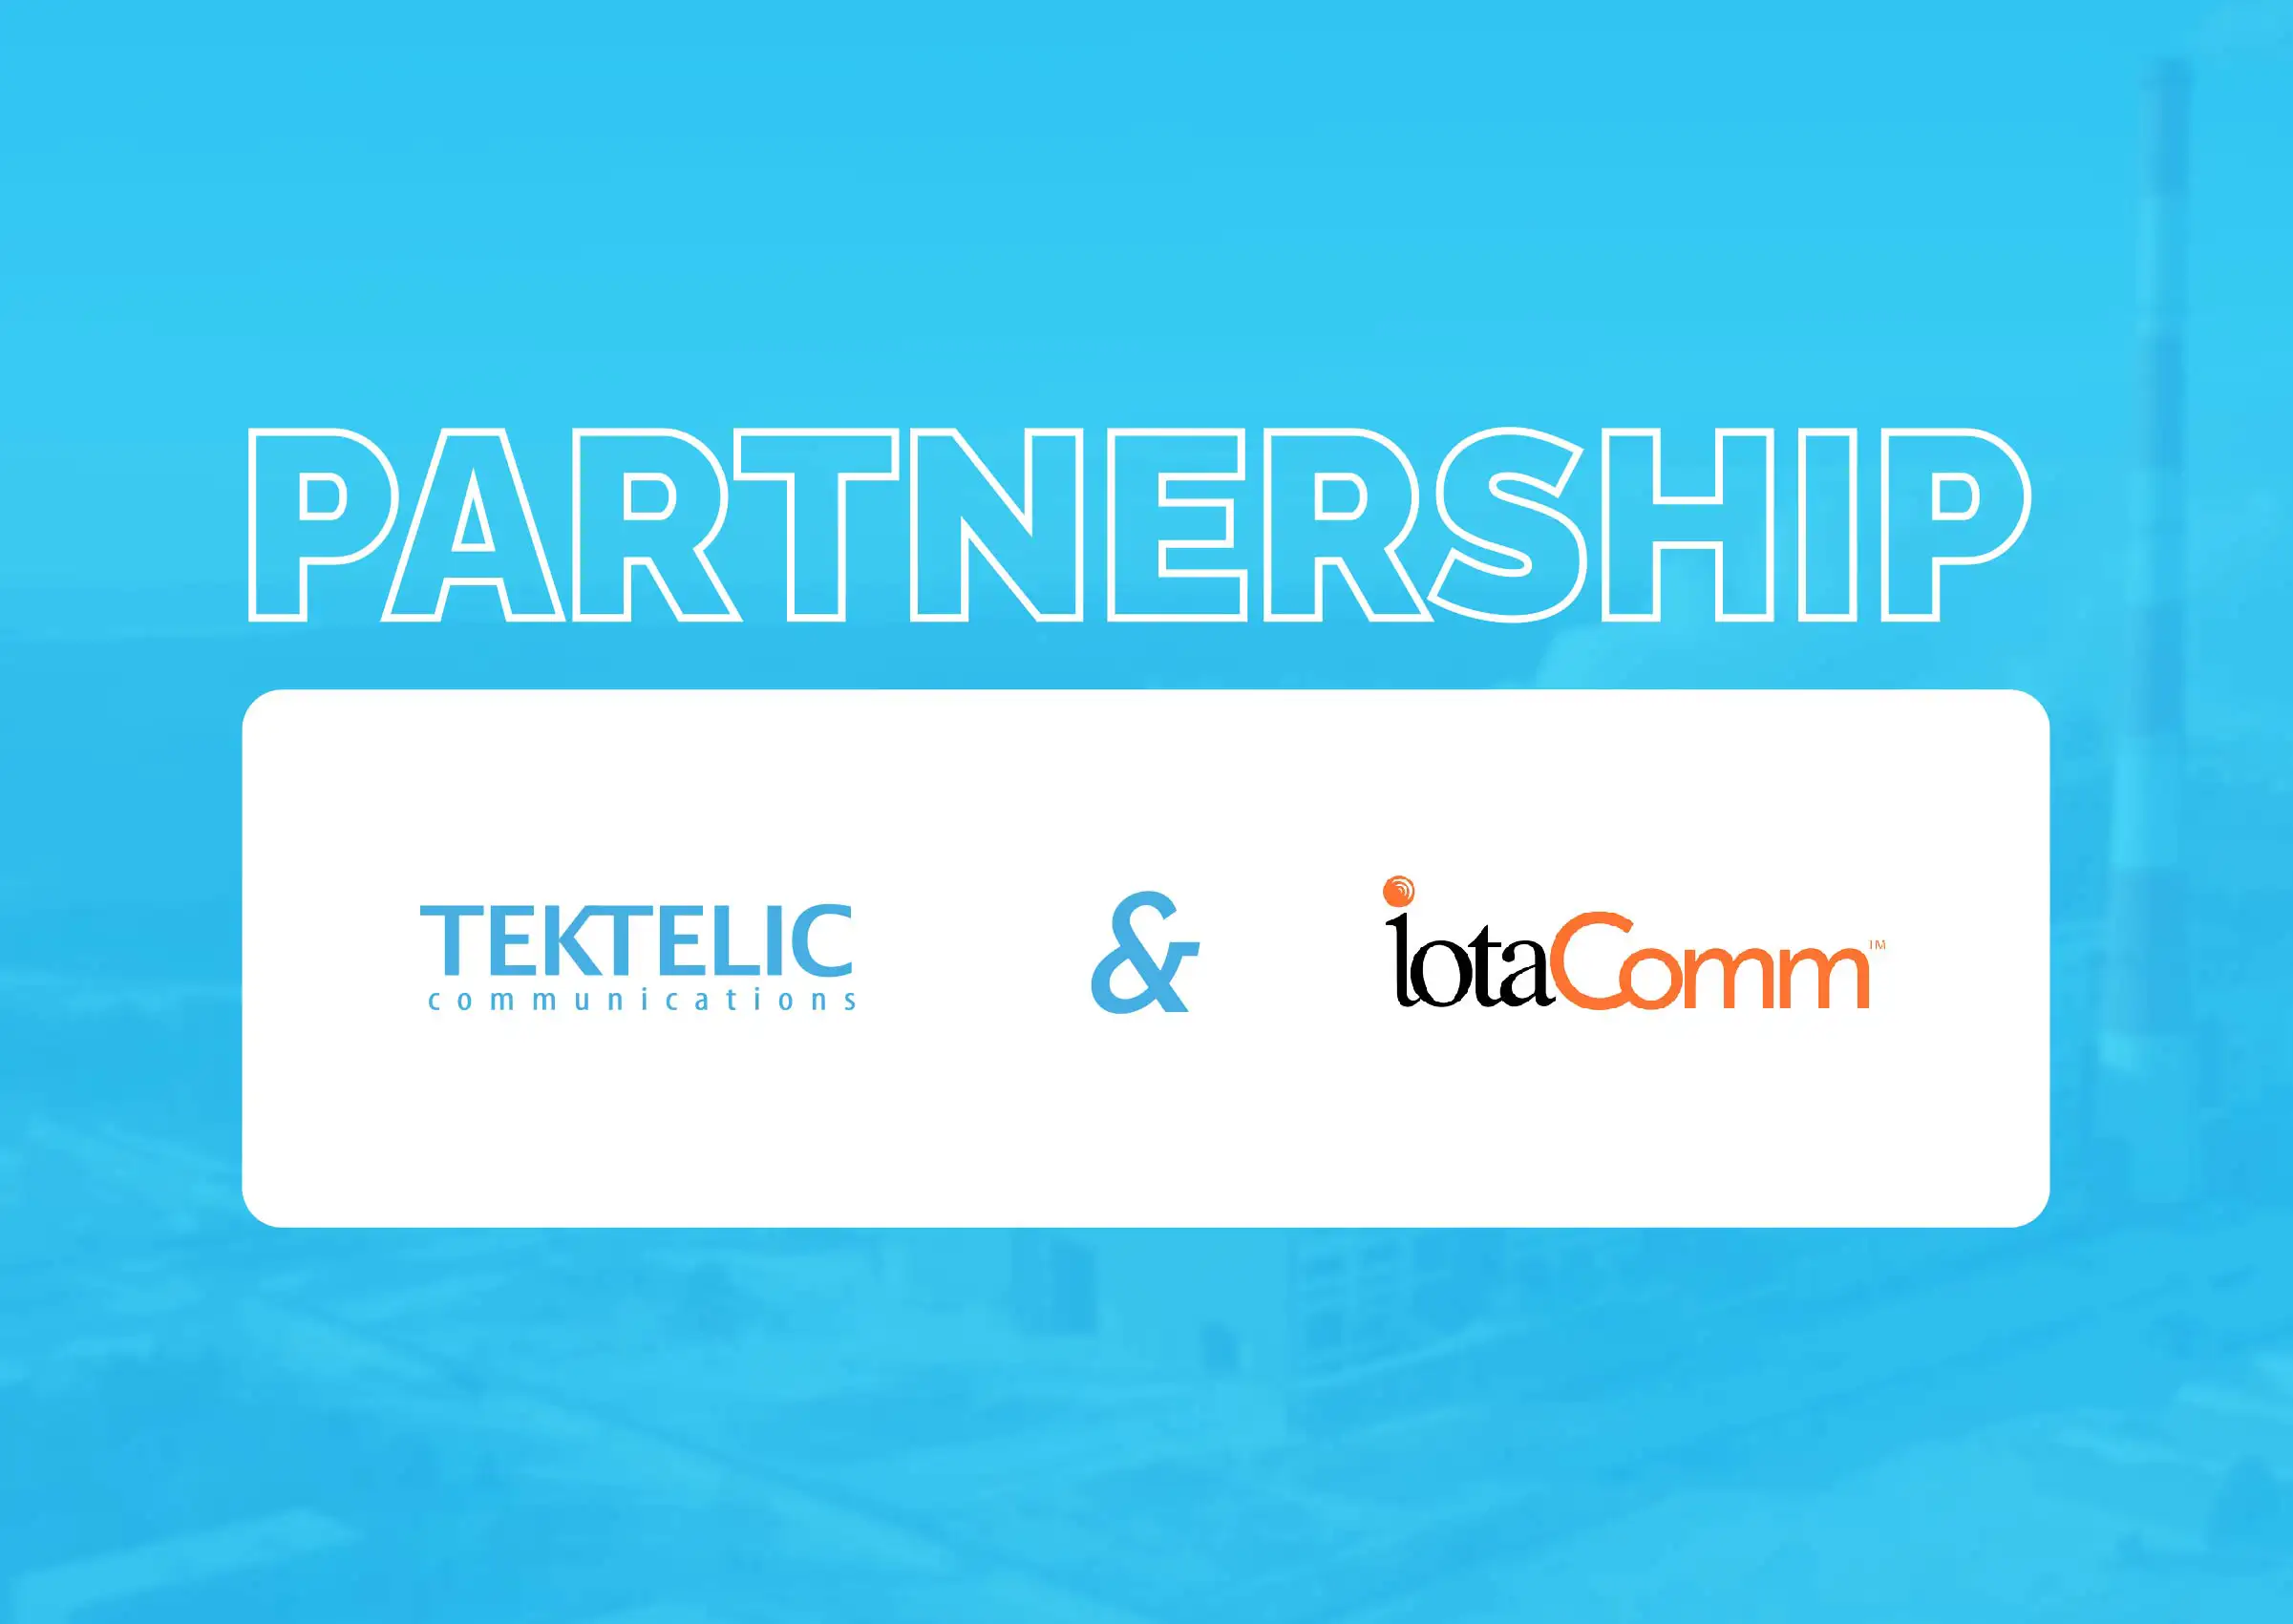 IotaComm and TEKTELIC Announce Agreement for Custom Gateway Based on Semtech’s LoRa® device-to-Cloud platform